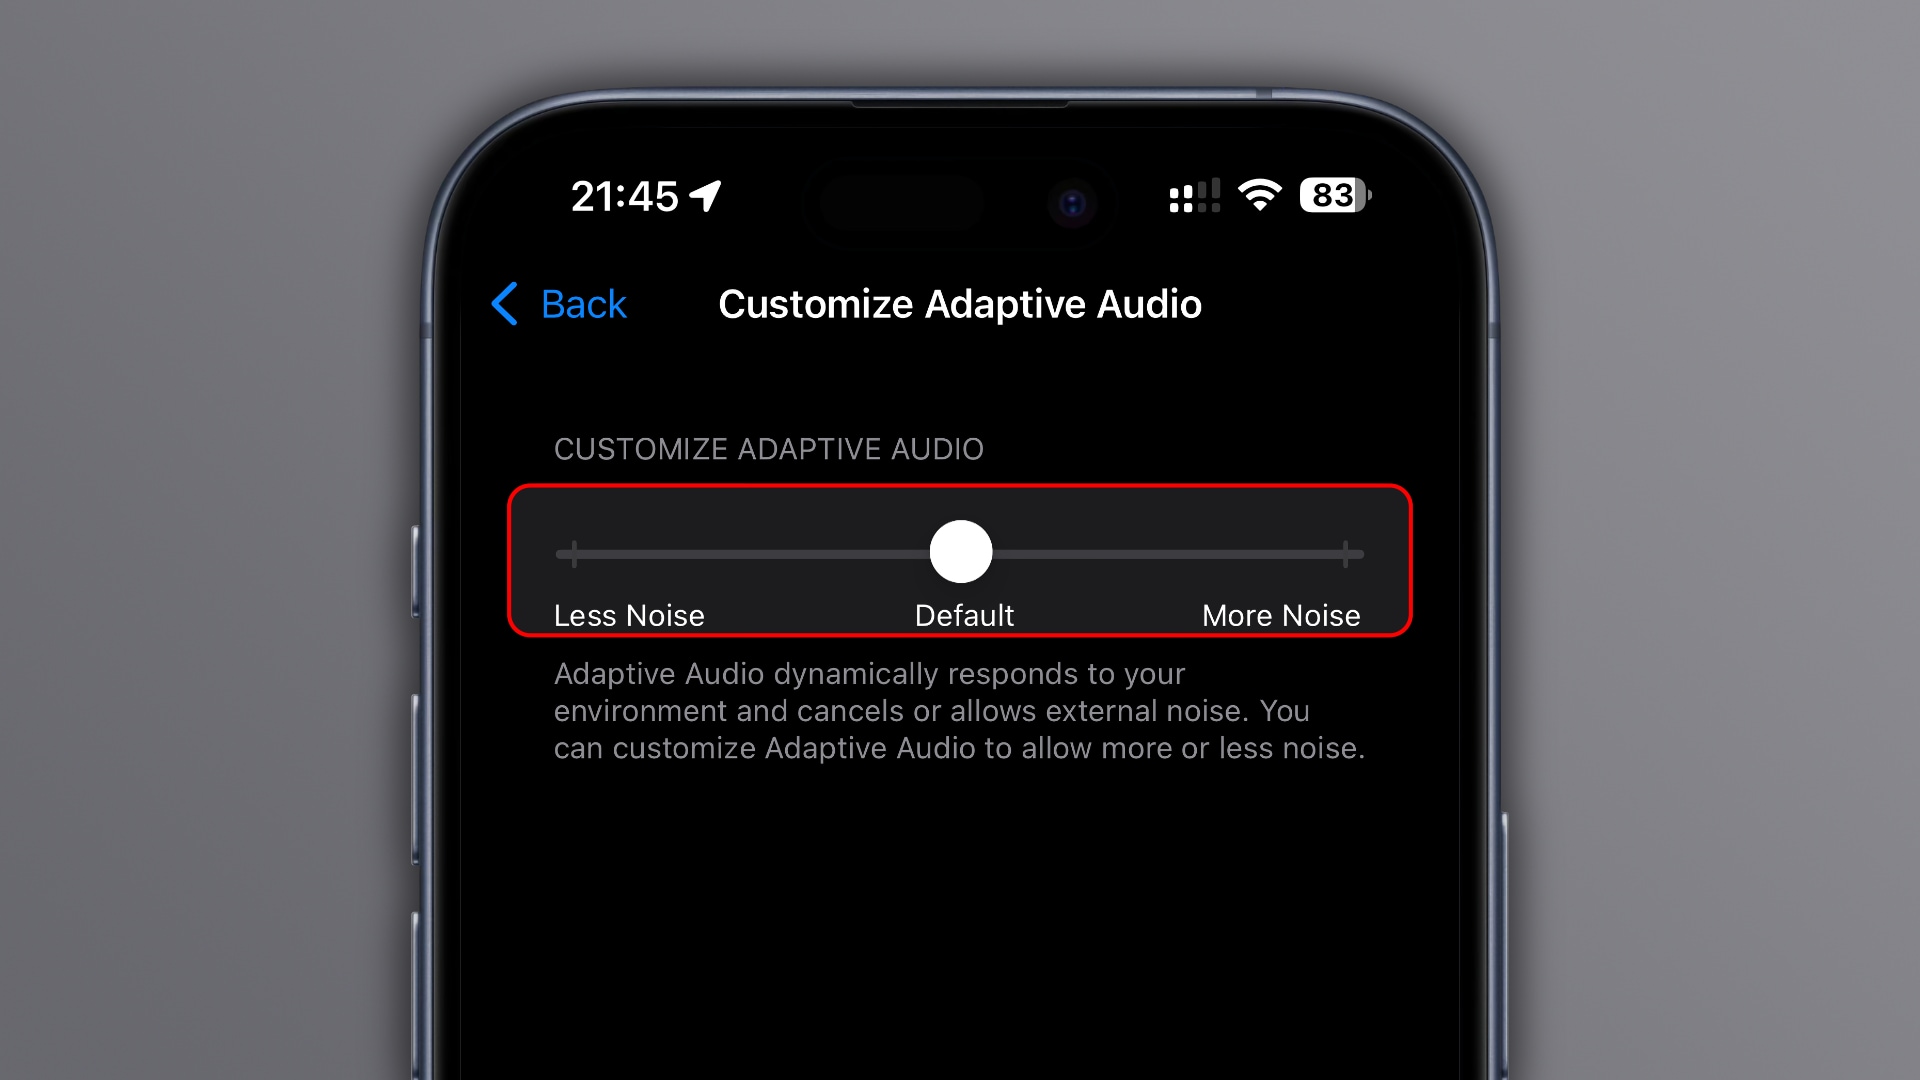 An iPhone showing the Customize Adaptive Audio screen in the Settings app with the slider to allow more or less external noise, set a against a light gray gradient background